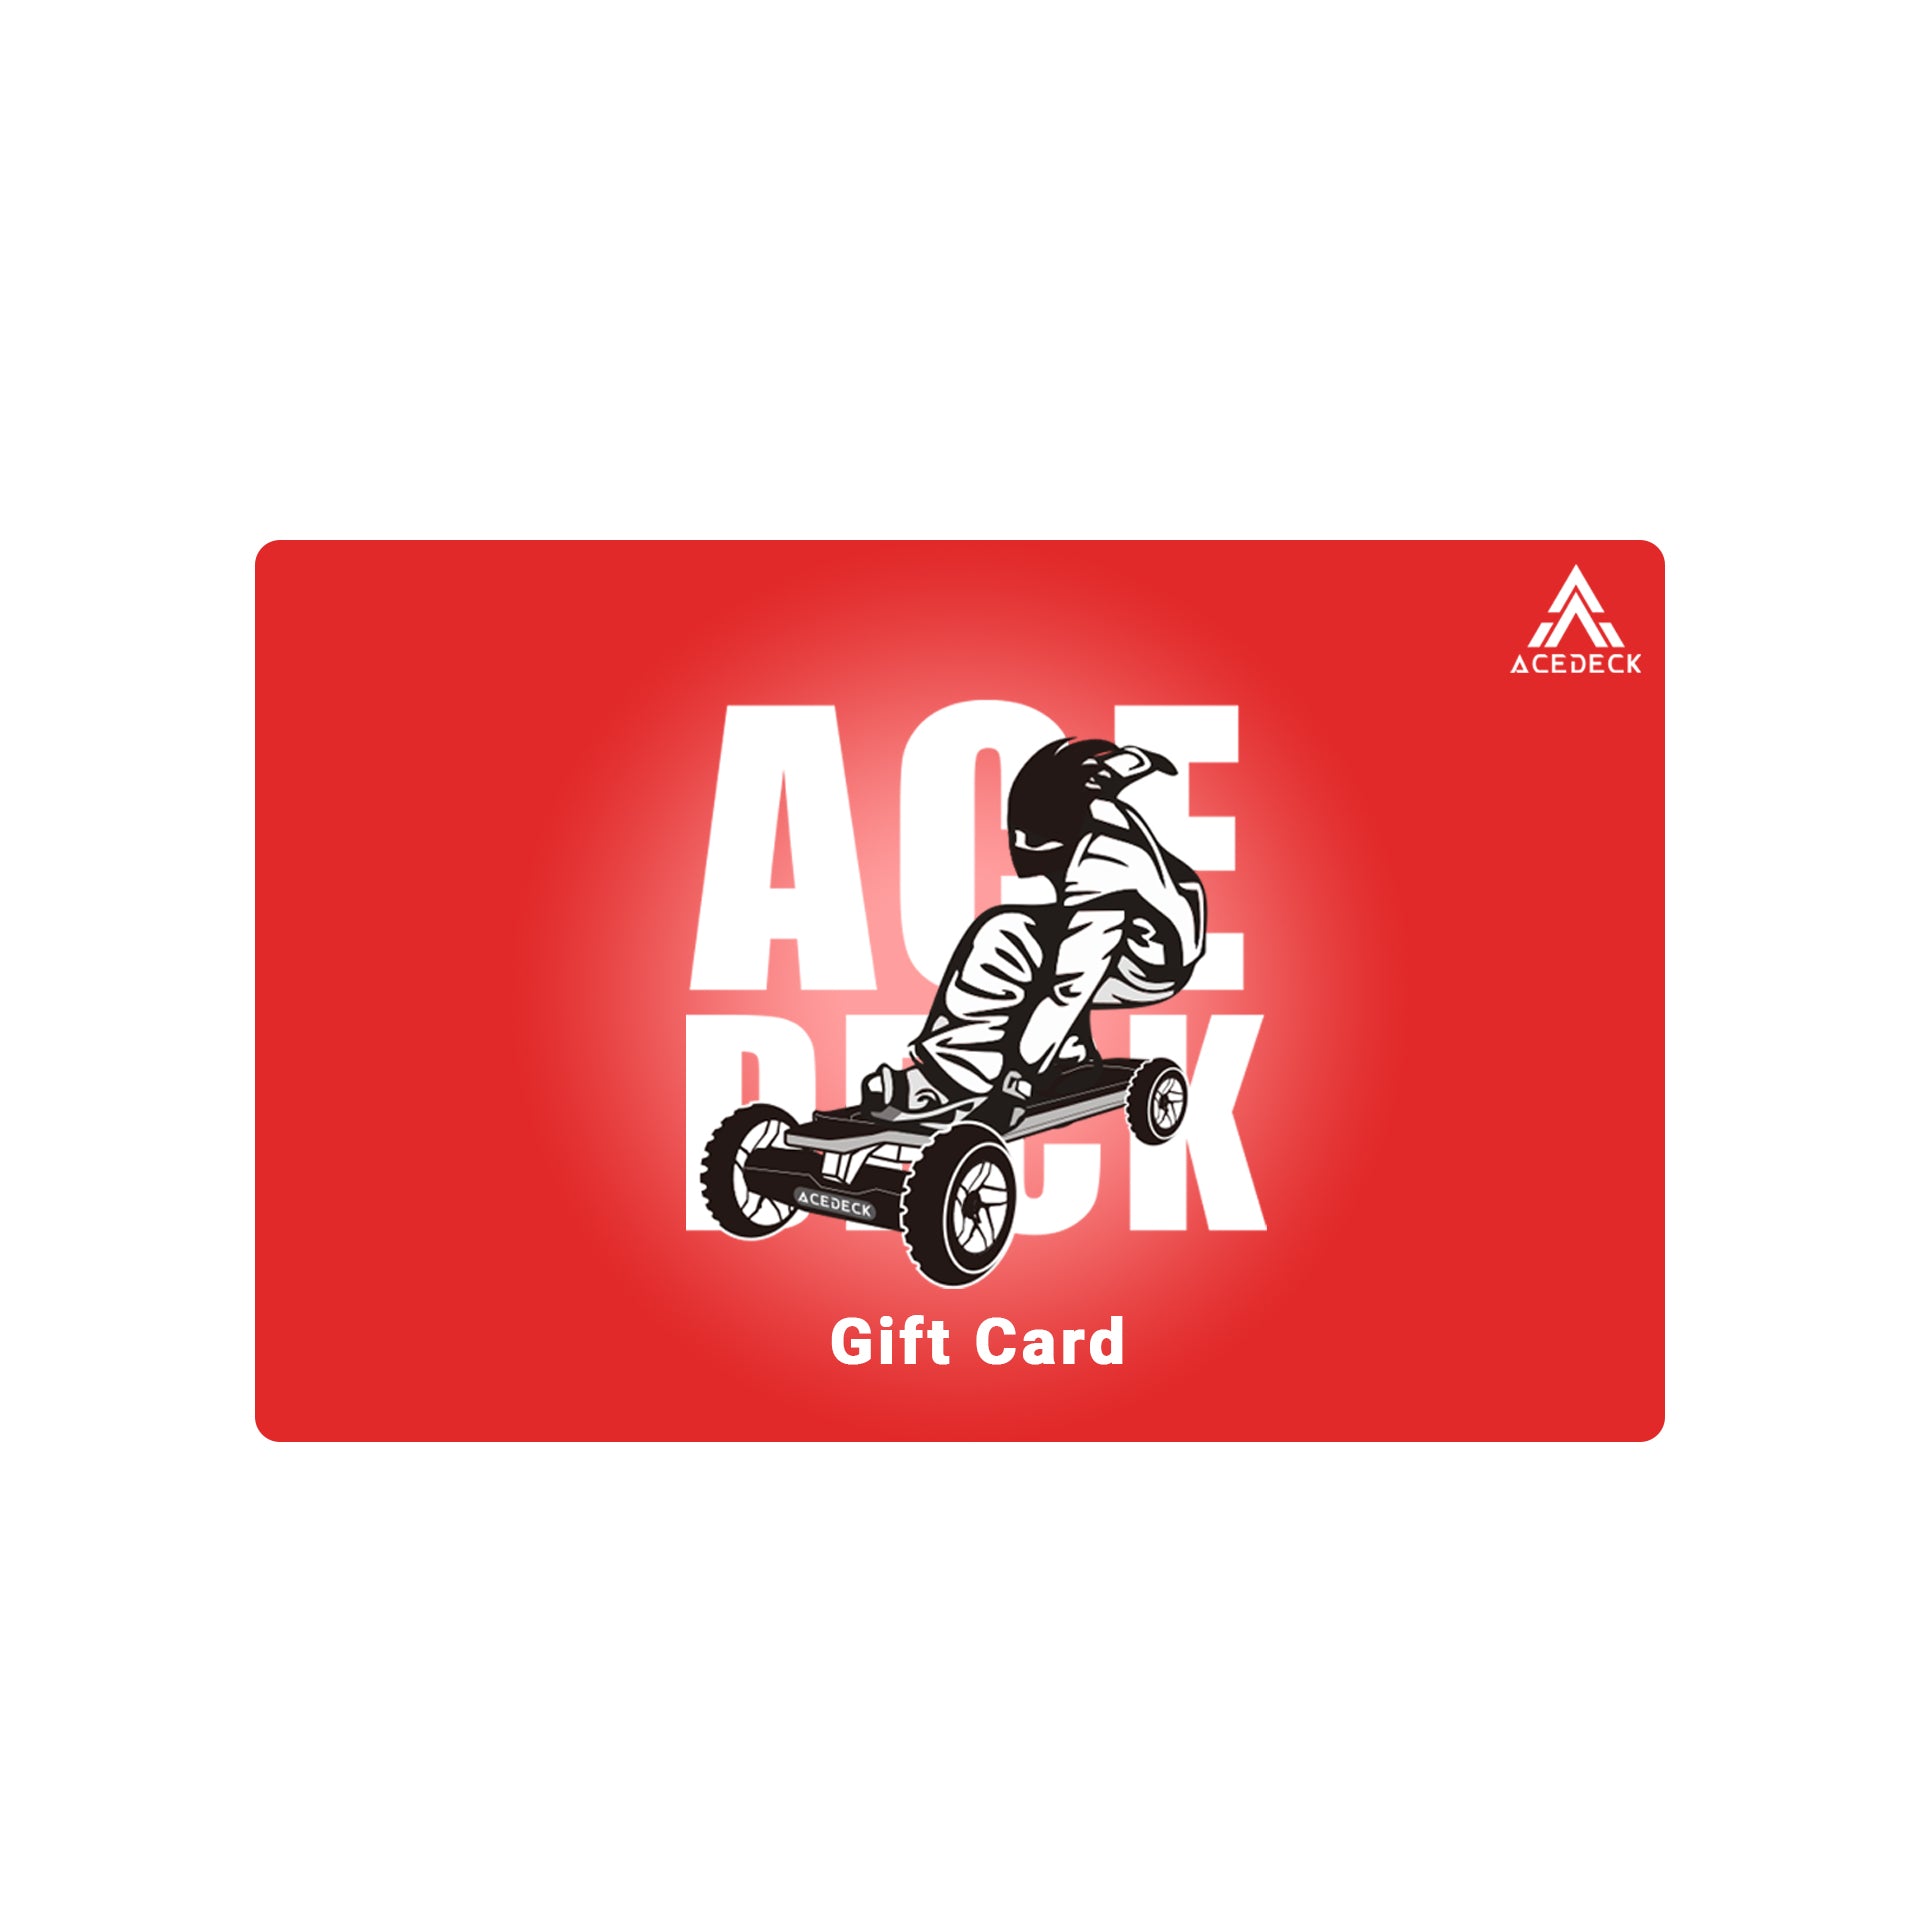 Acedeck®  E Gift Card - Nyx Z1, Ares X1, Ares X3, Nomad N1, Stella S1, Stella S3, Stella Mini